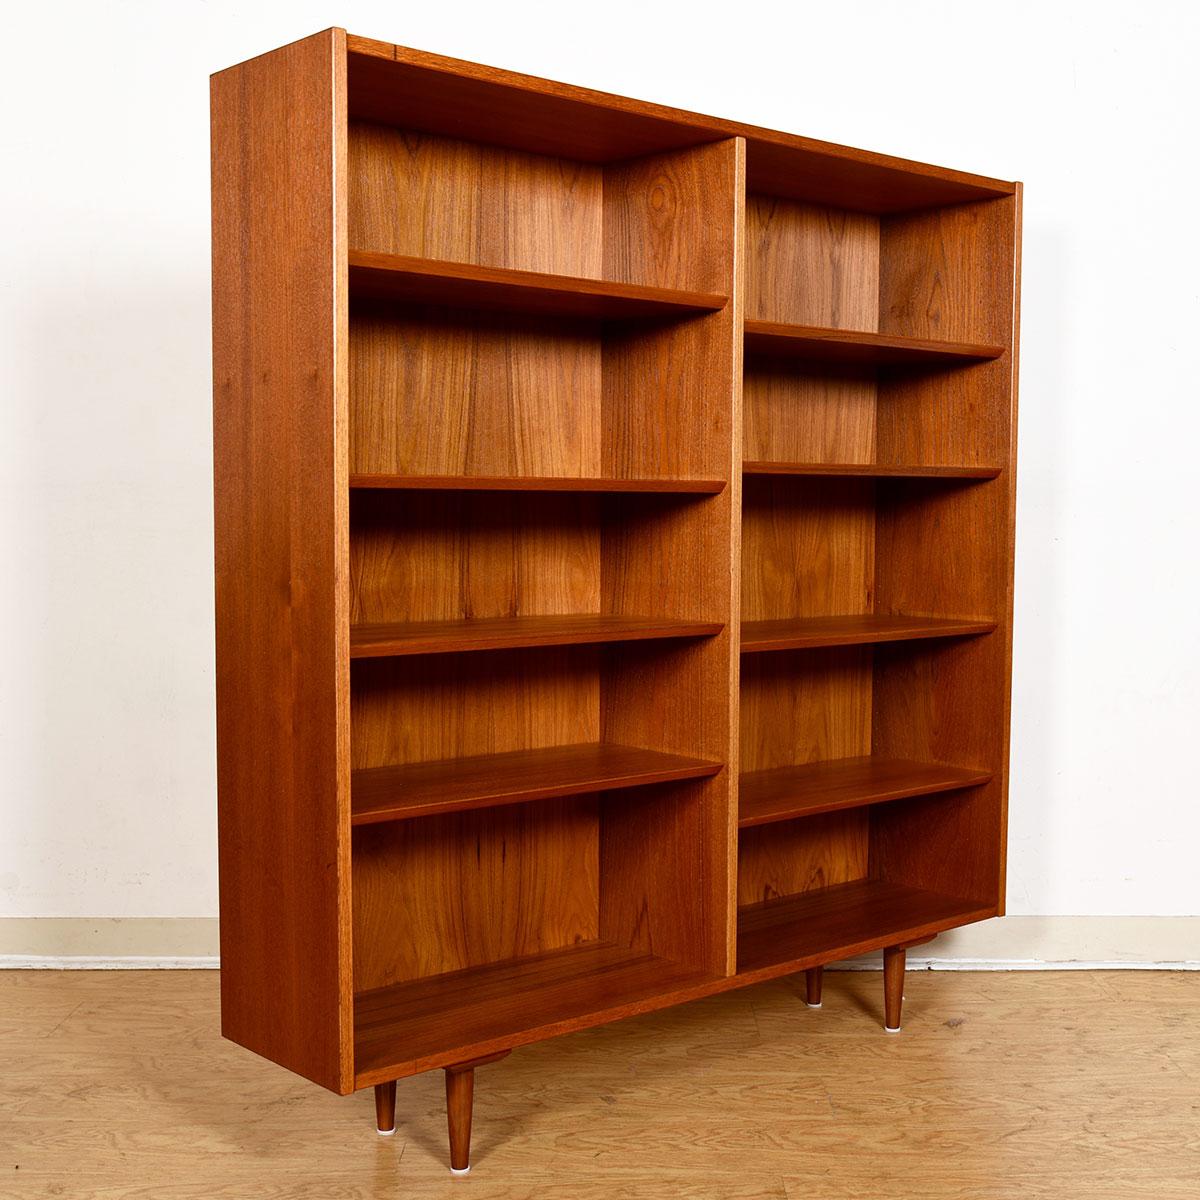 Adjustable Bookcase in Danish Modern Walnut In Good Condition For Sale In Kensington, MD